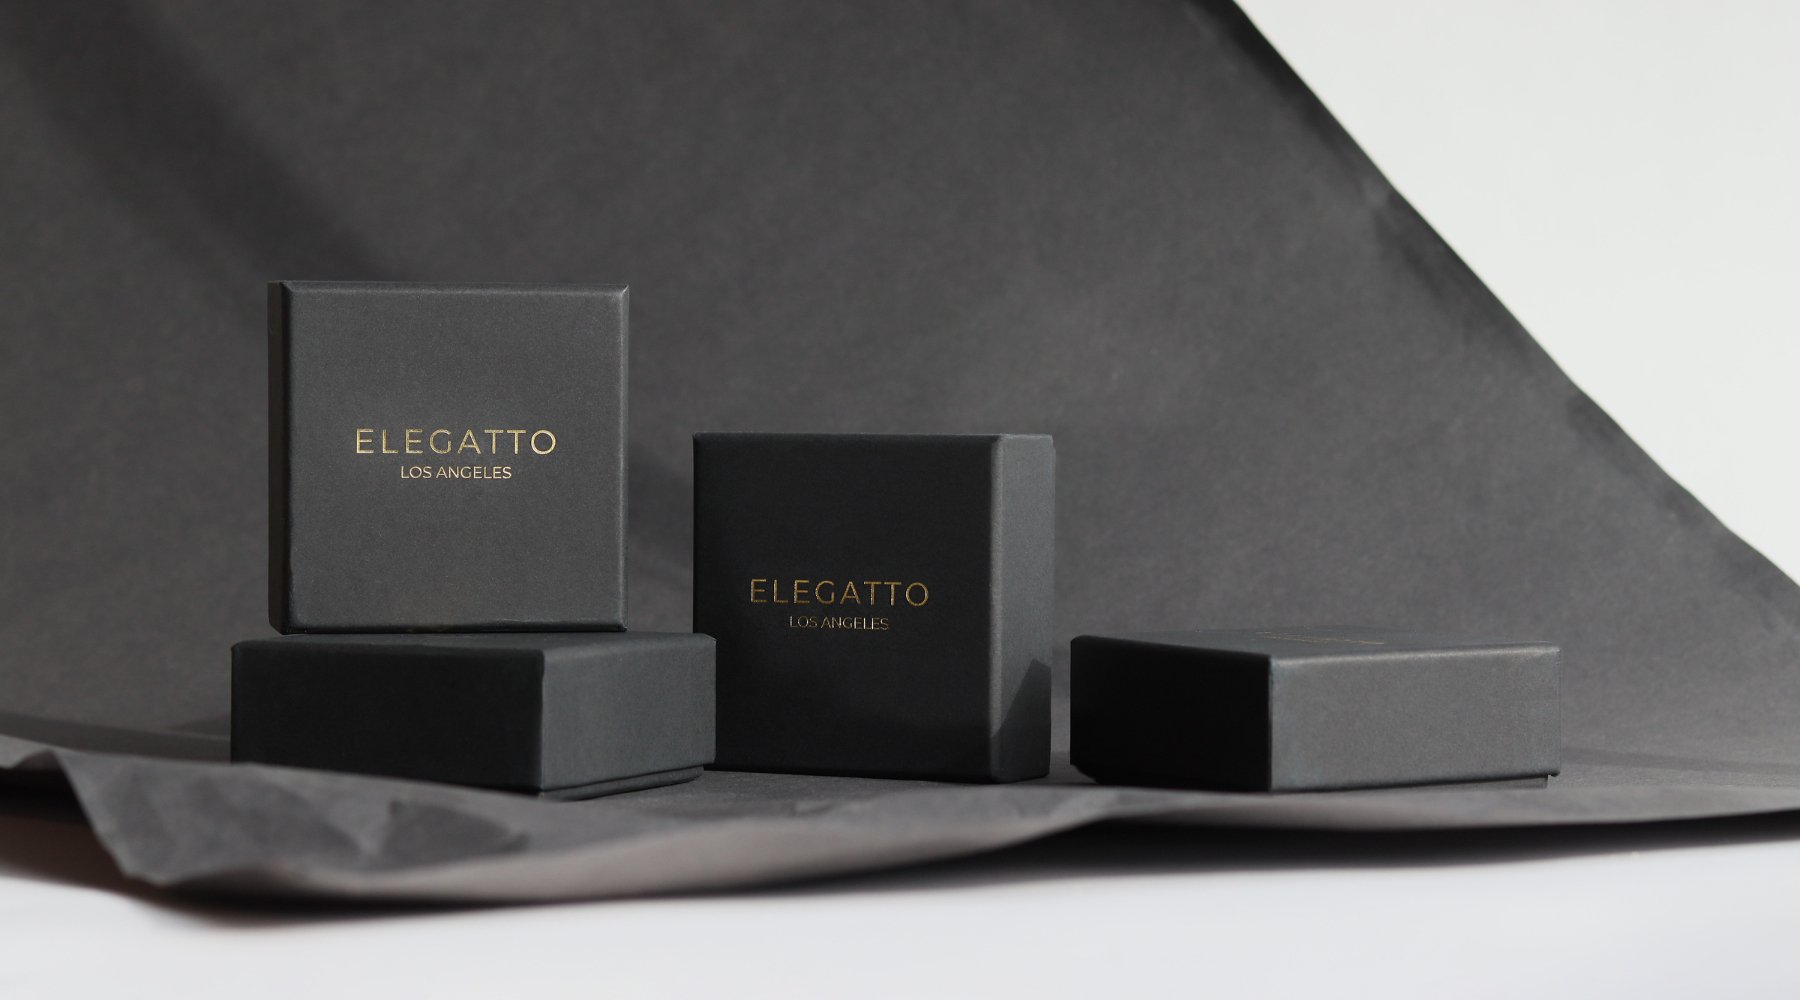 How to Care for your Elegatto Jewelry - Elegatto